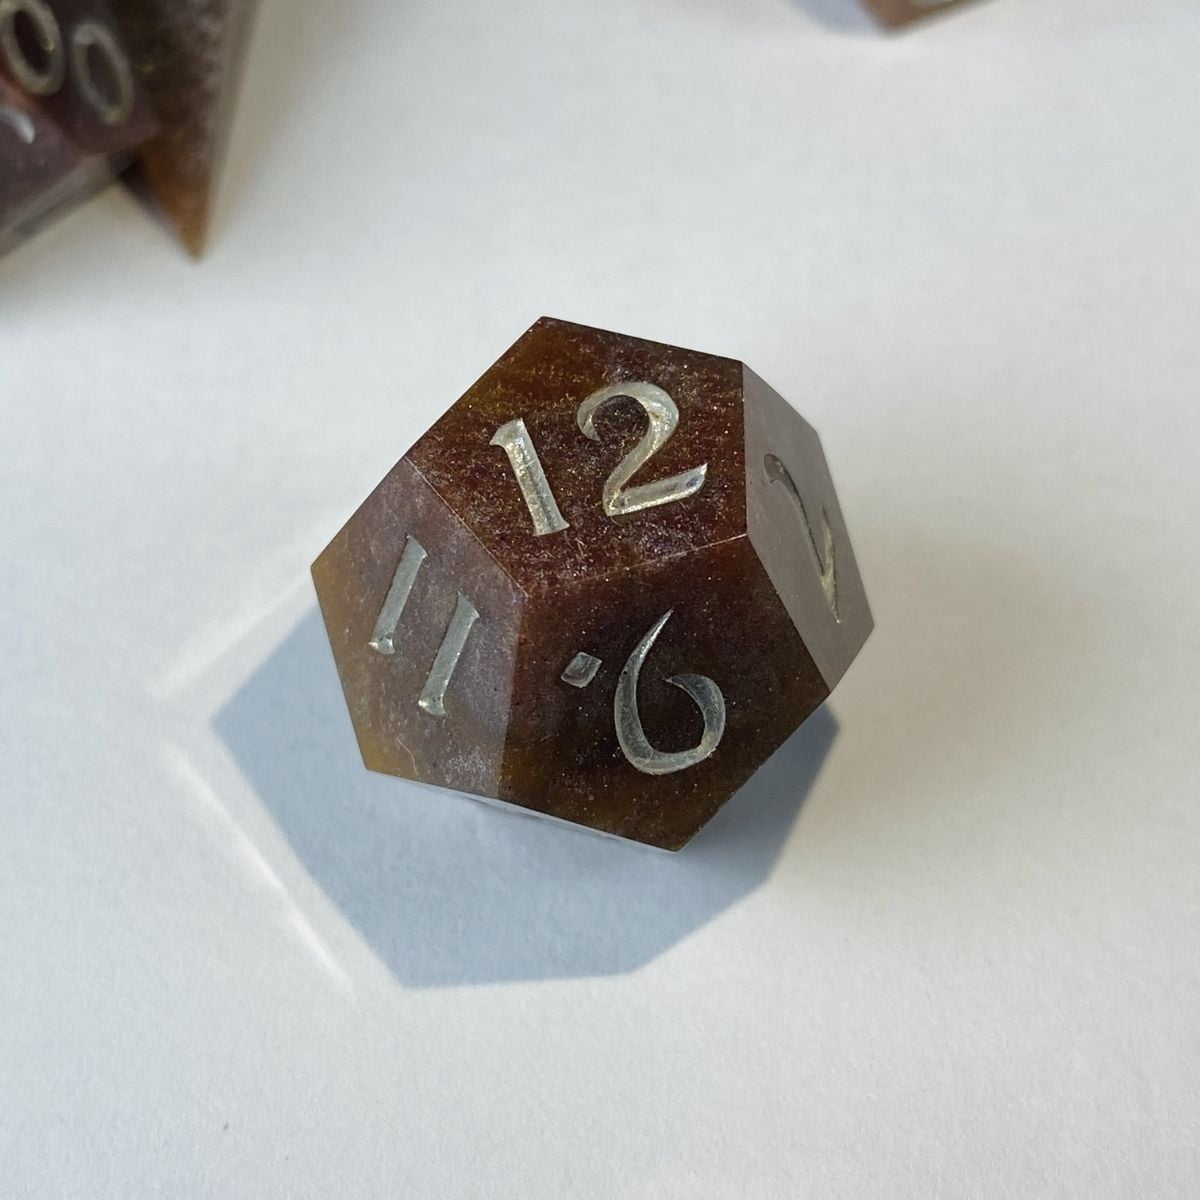 WHAT IS A D4? #dungeonsanddragons #dice #dnd #learning #subscribe 